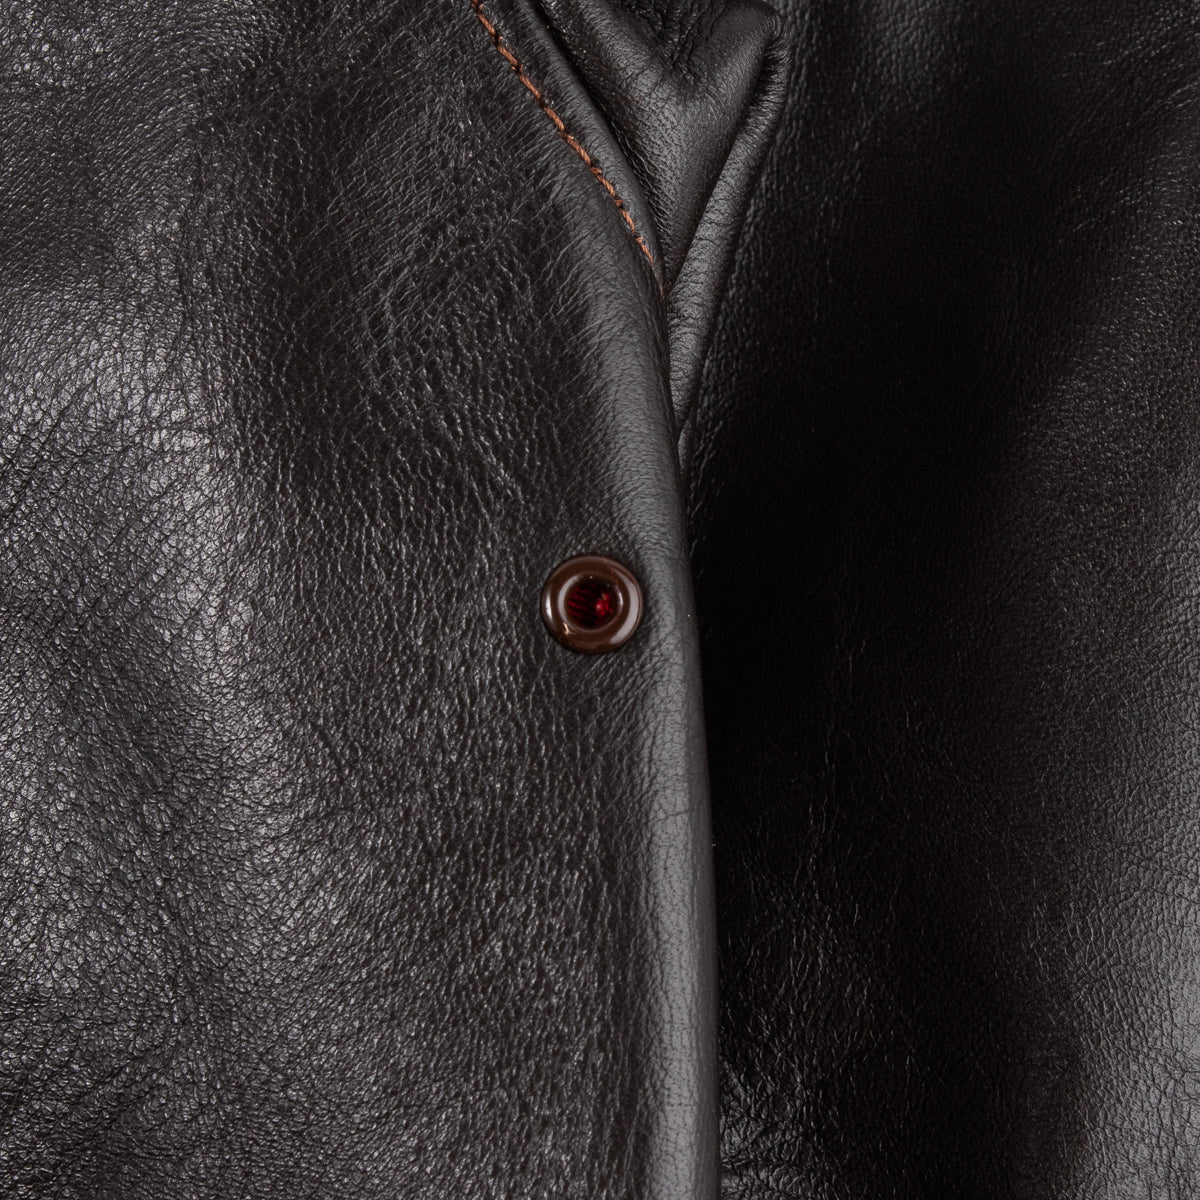 The Real McCoy's Type A-2 Leather Jacket